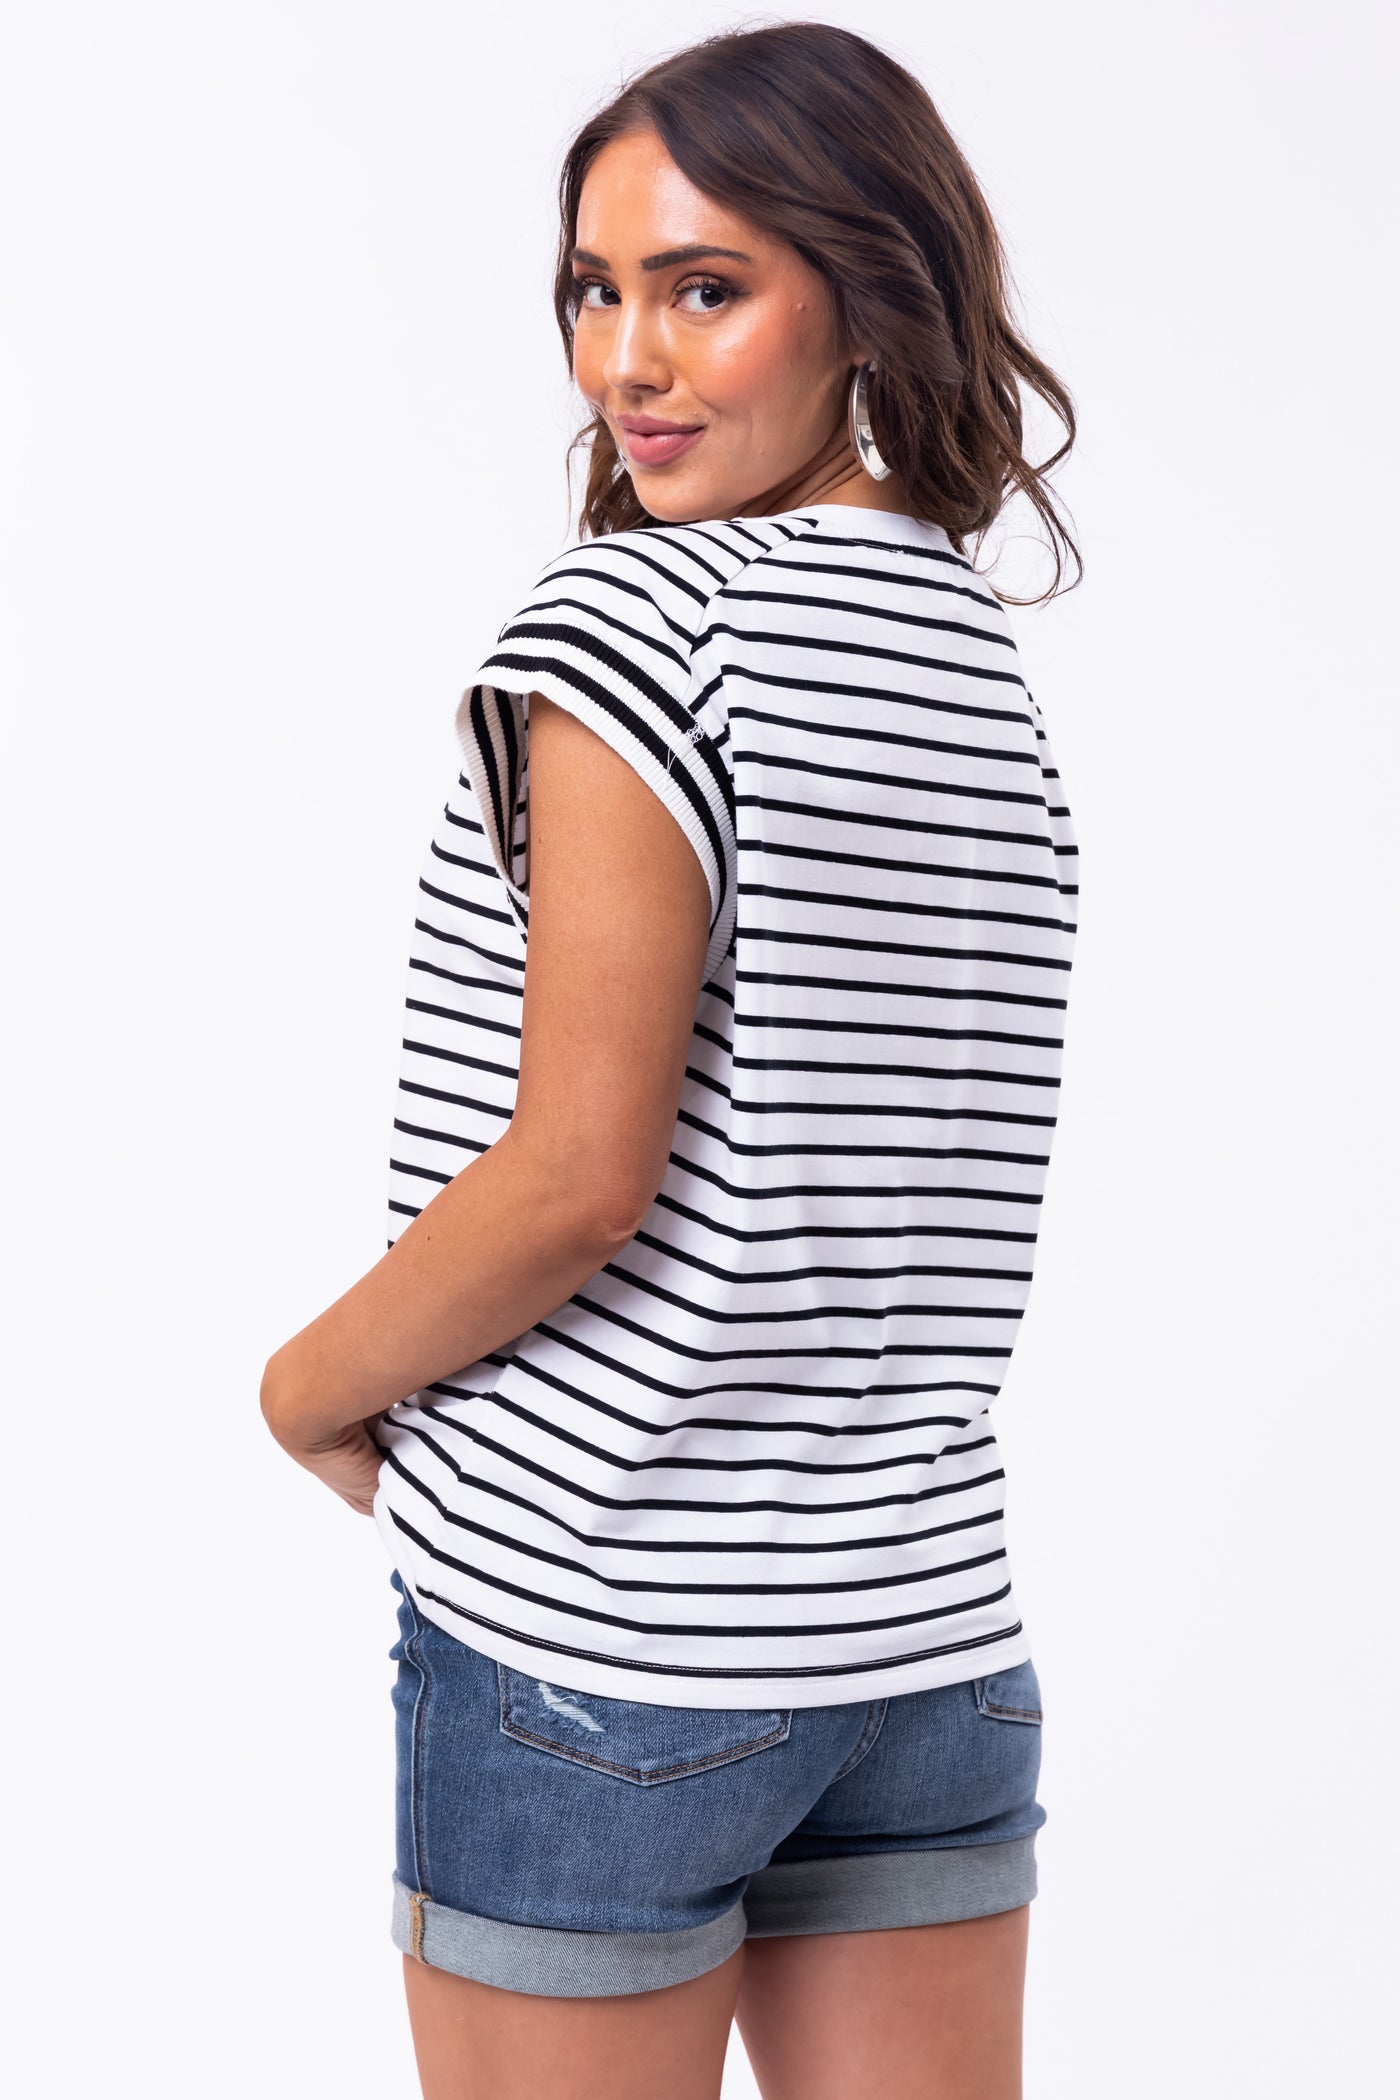 Flying Tomato Black Striped Cap Sleeve Top | Lime Lush